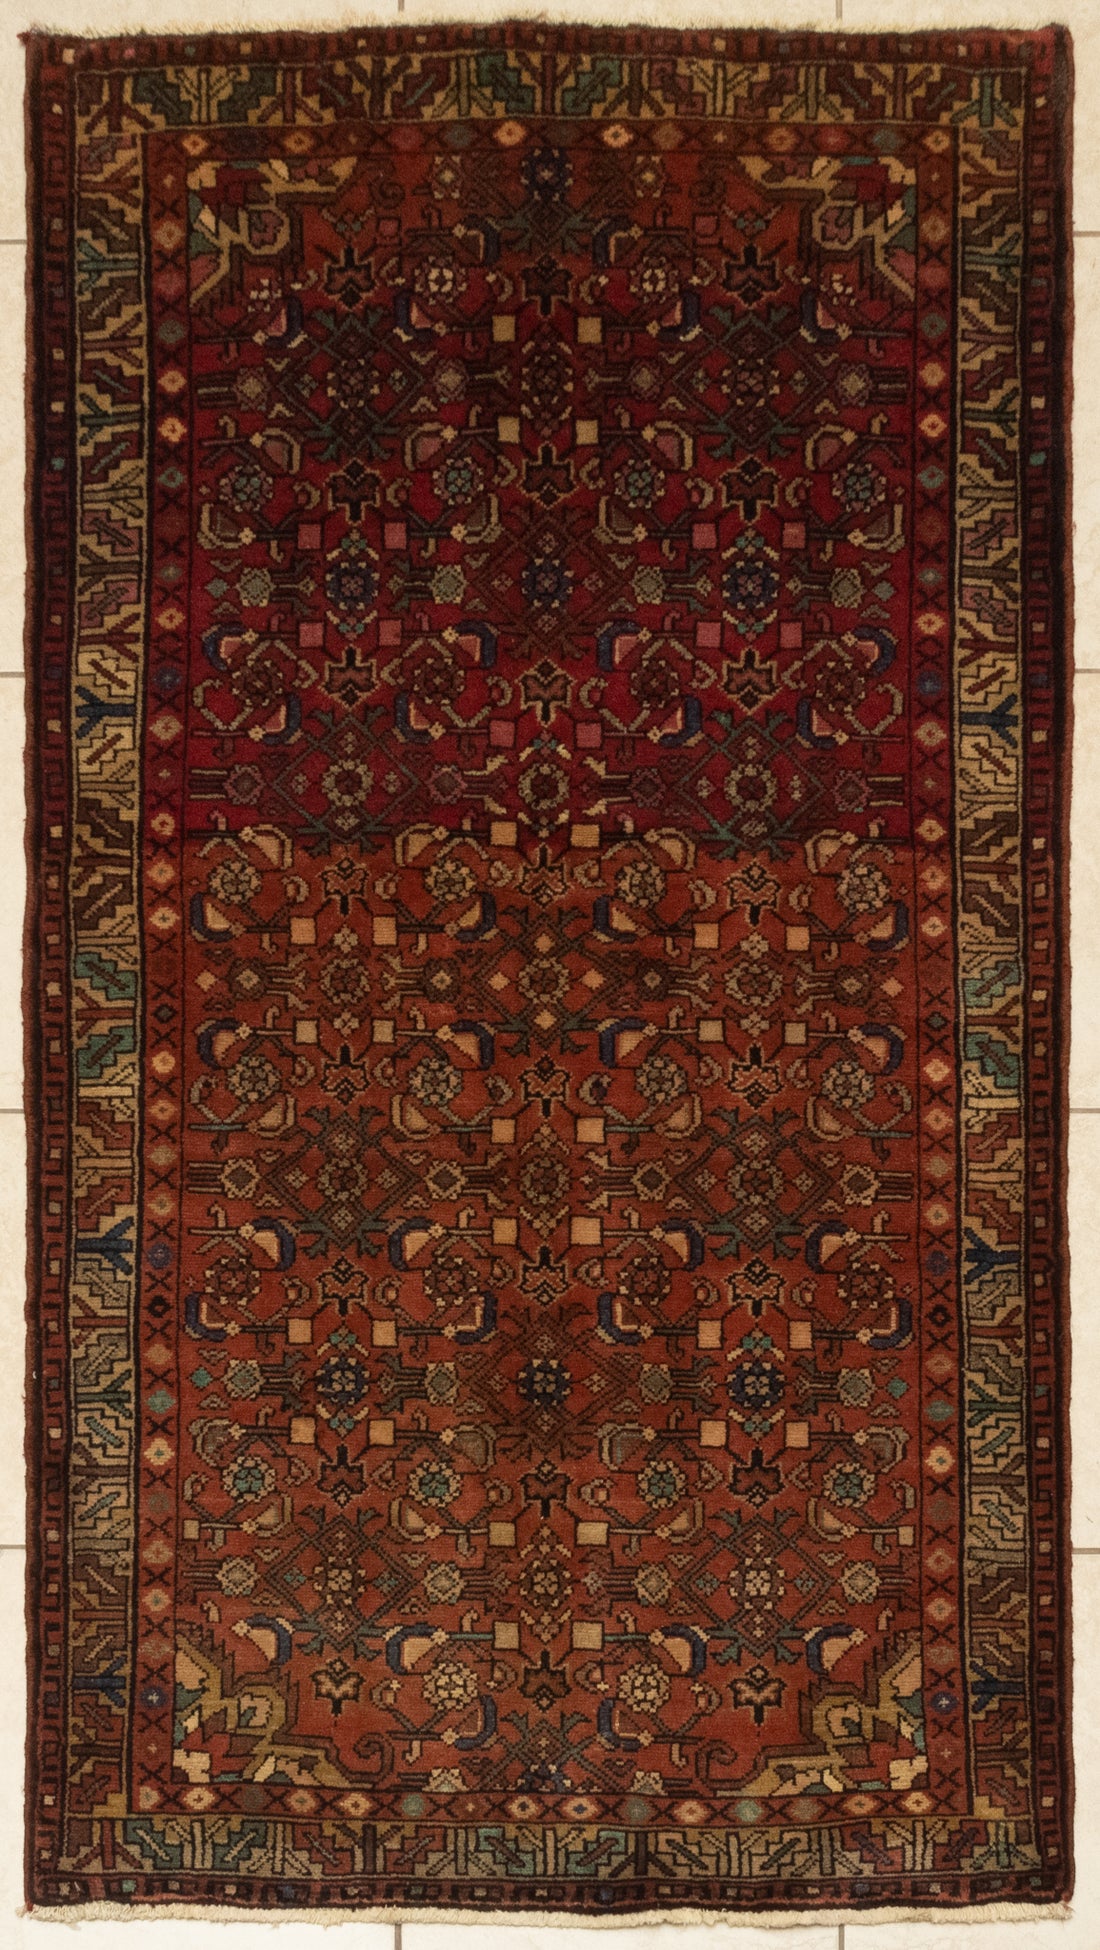 Hand-Knotted Wool Rug 6'5" x 3'6"